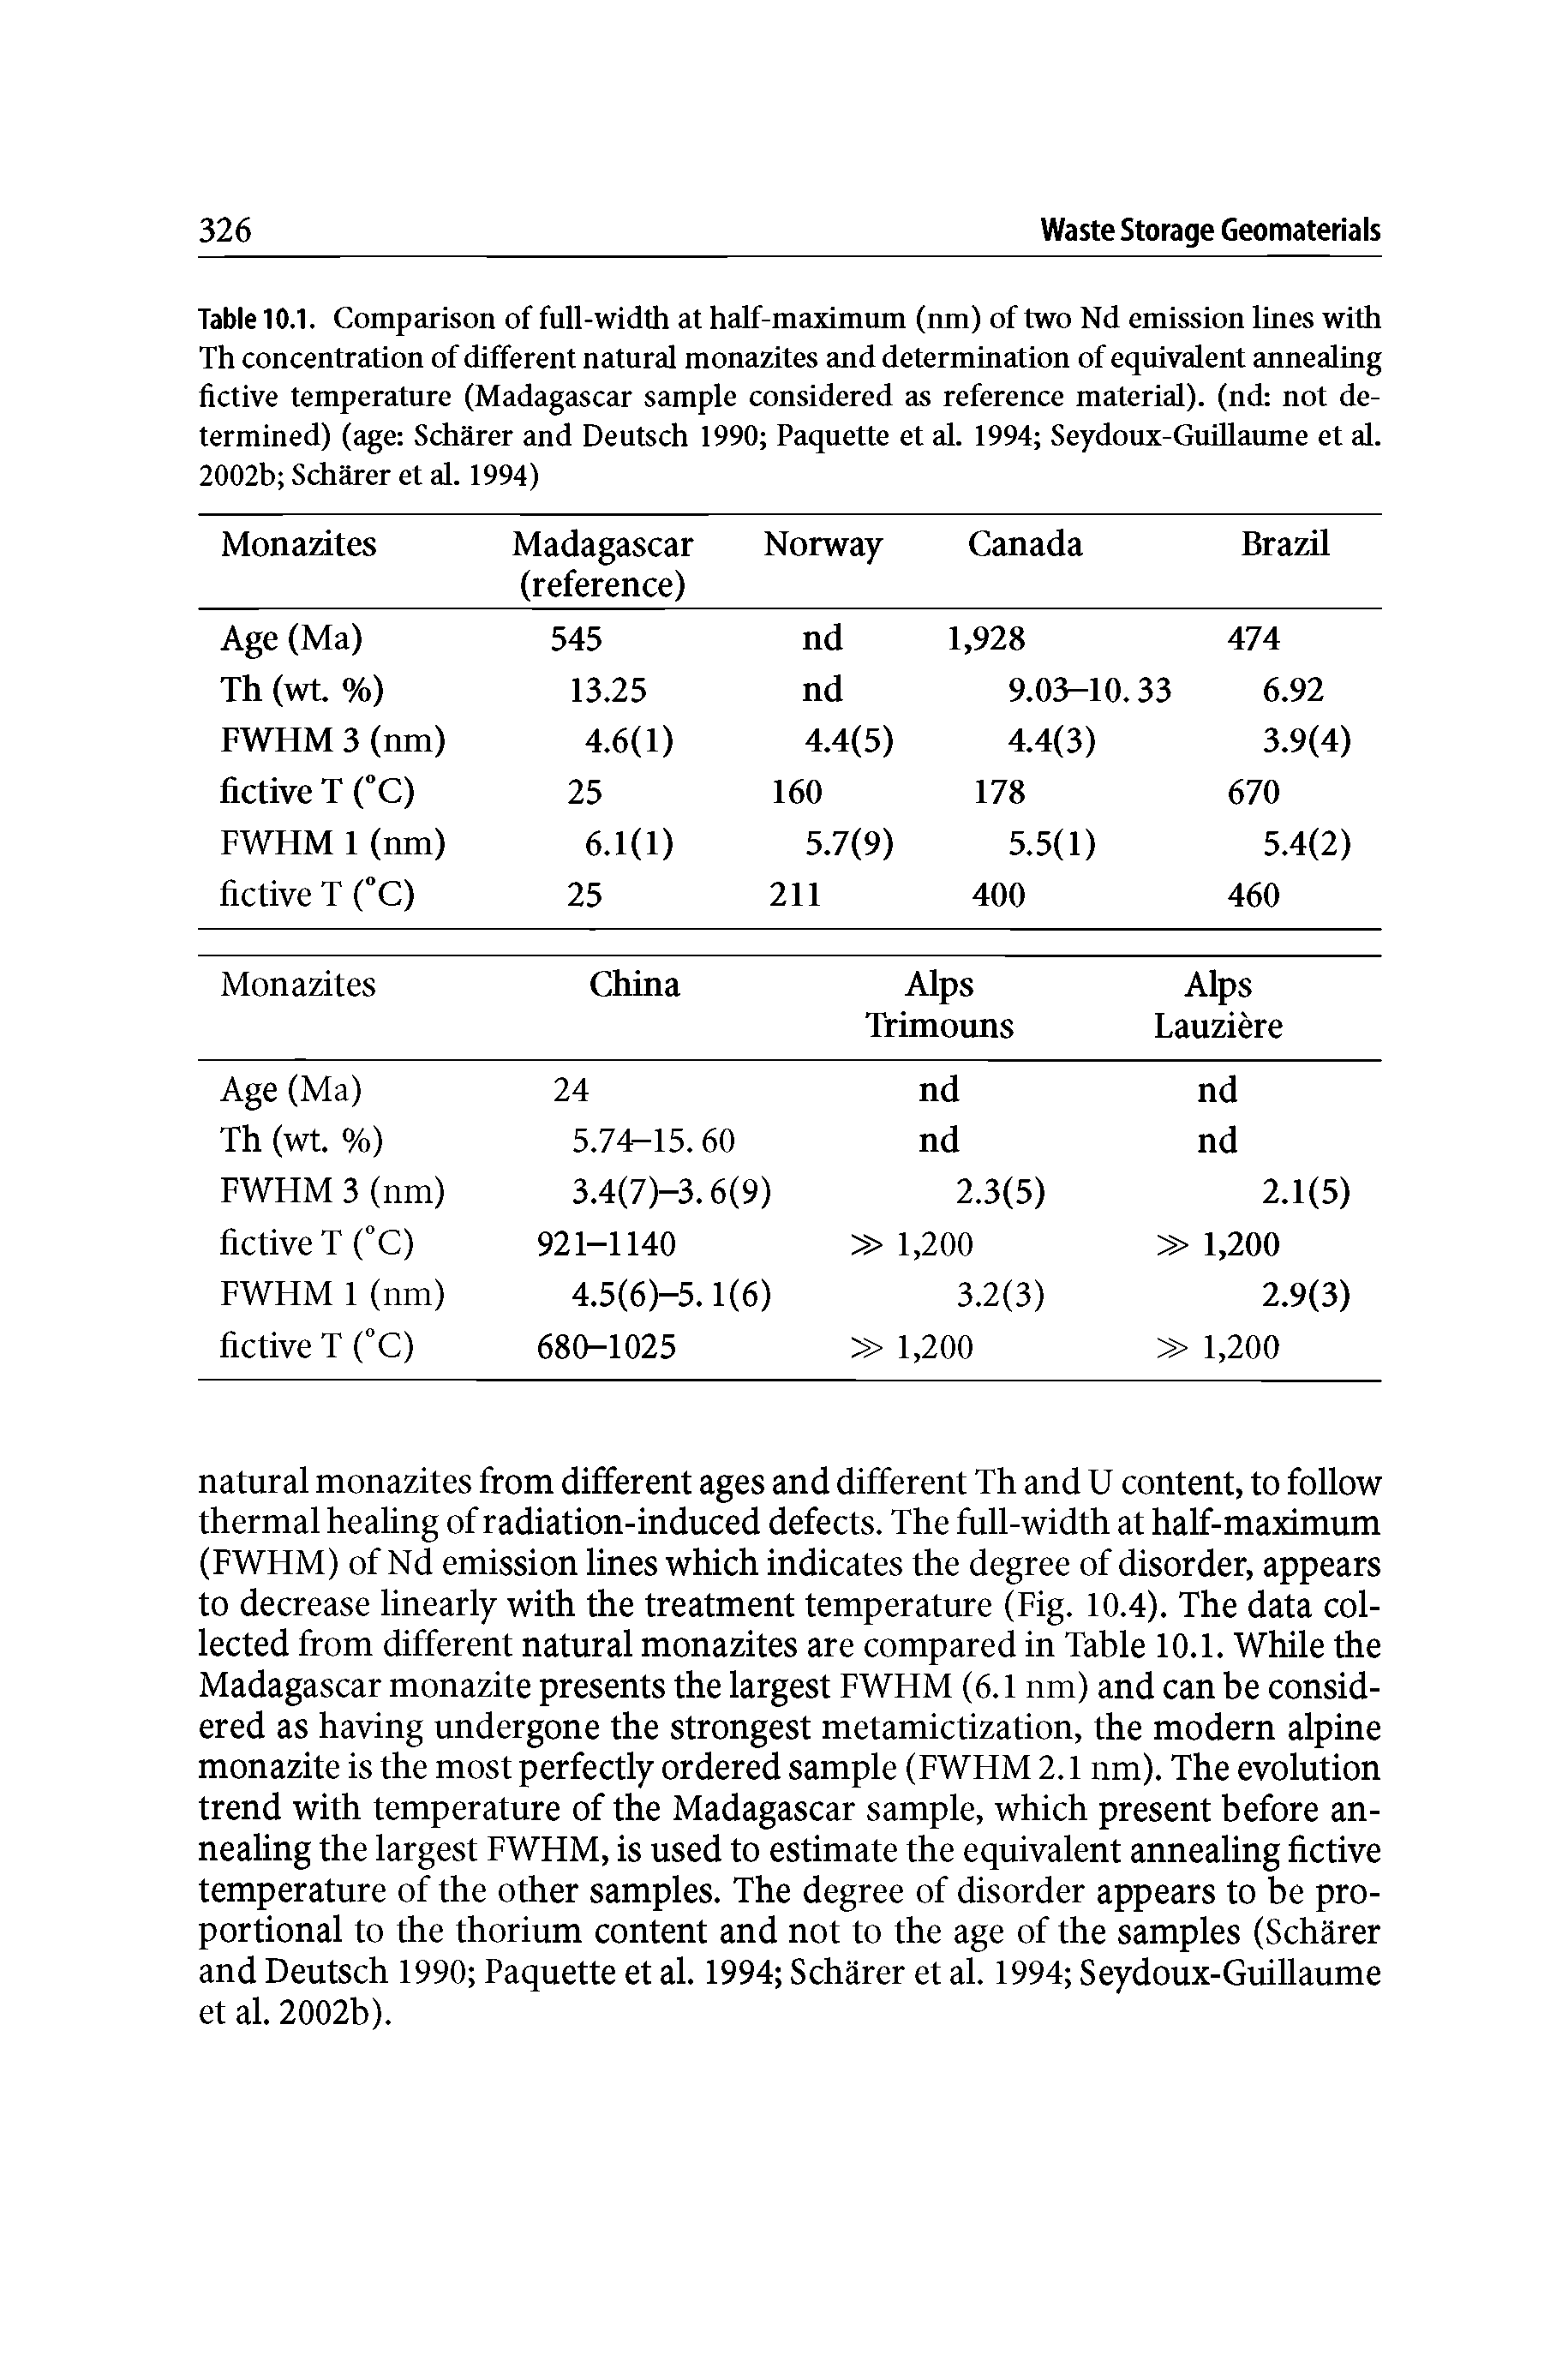 Table 10.1. Comparison of full-width at half-maximum (nm) of two Nd emission lines with Th concentration of different natural monazites and determination of equivalent annealing fictive temperature (Madagascar sample considered as reference material), (nd not determined) (age Scharer and Deutsch 1990 Paquette et al. 1994 Seydoux-GuiUaume et al. 2002b Scharer et al. 1994)...